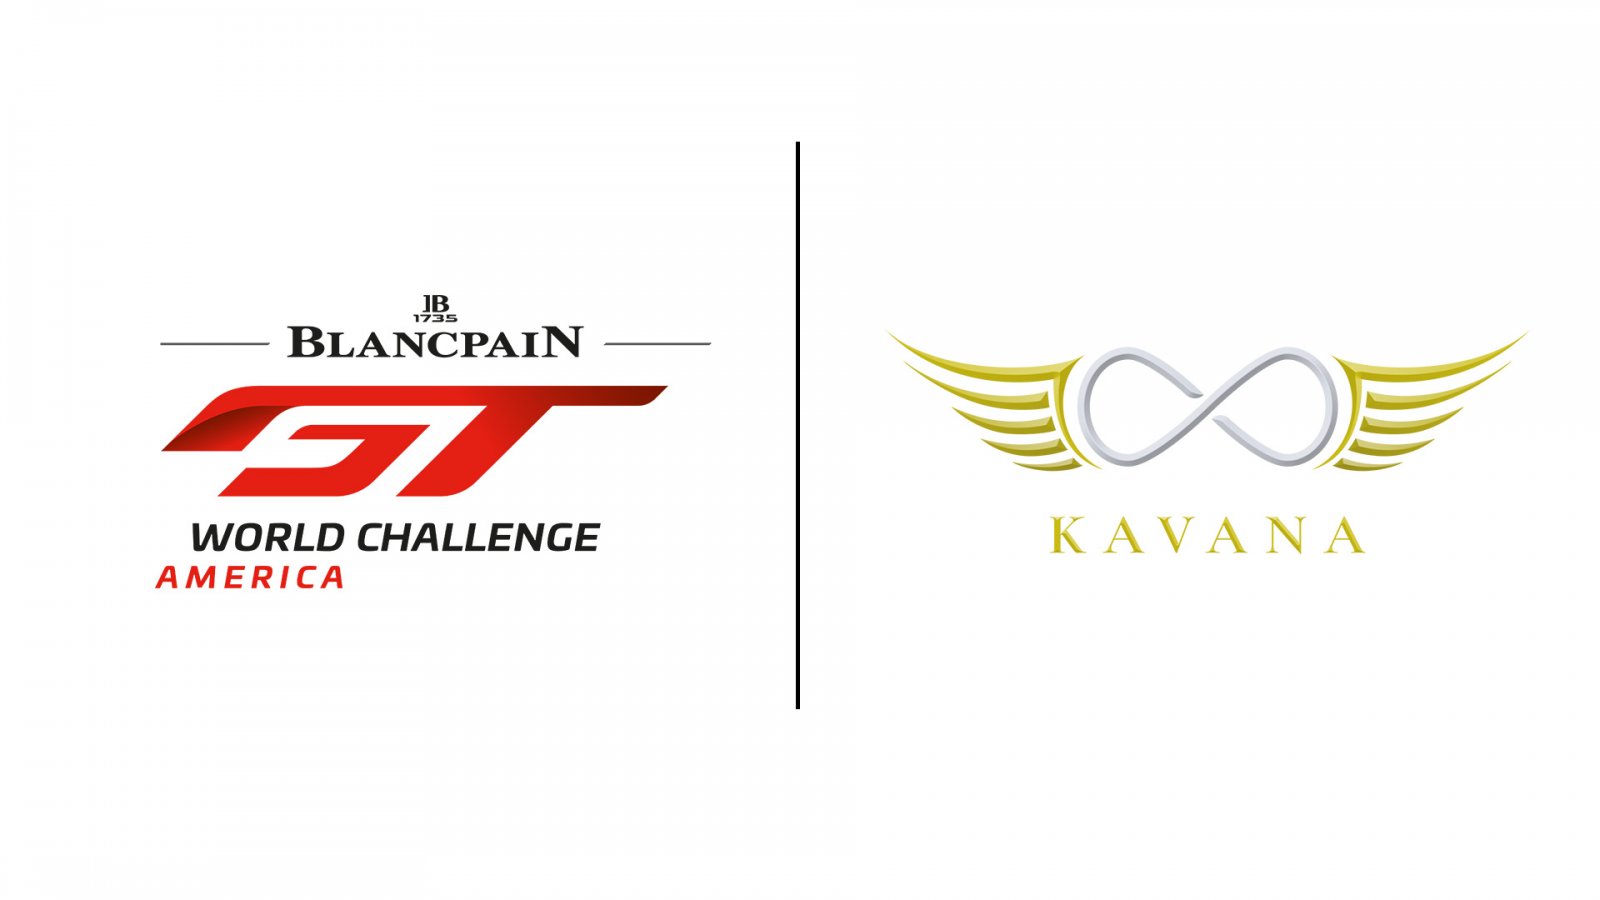 Kavana Rum Launches New Award with $500,000 Up for Grabs for SRO Motorsports America Series